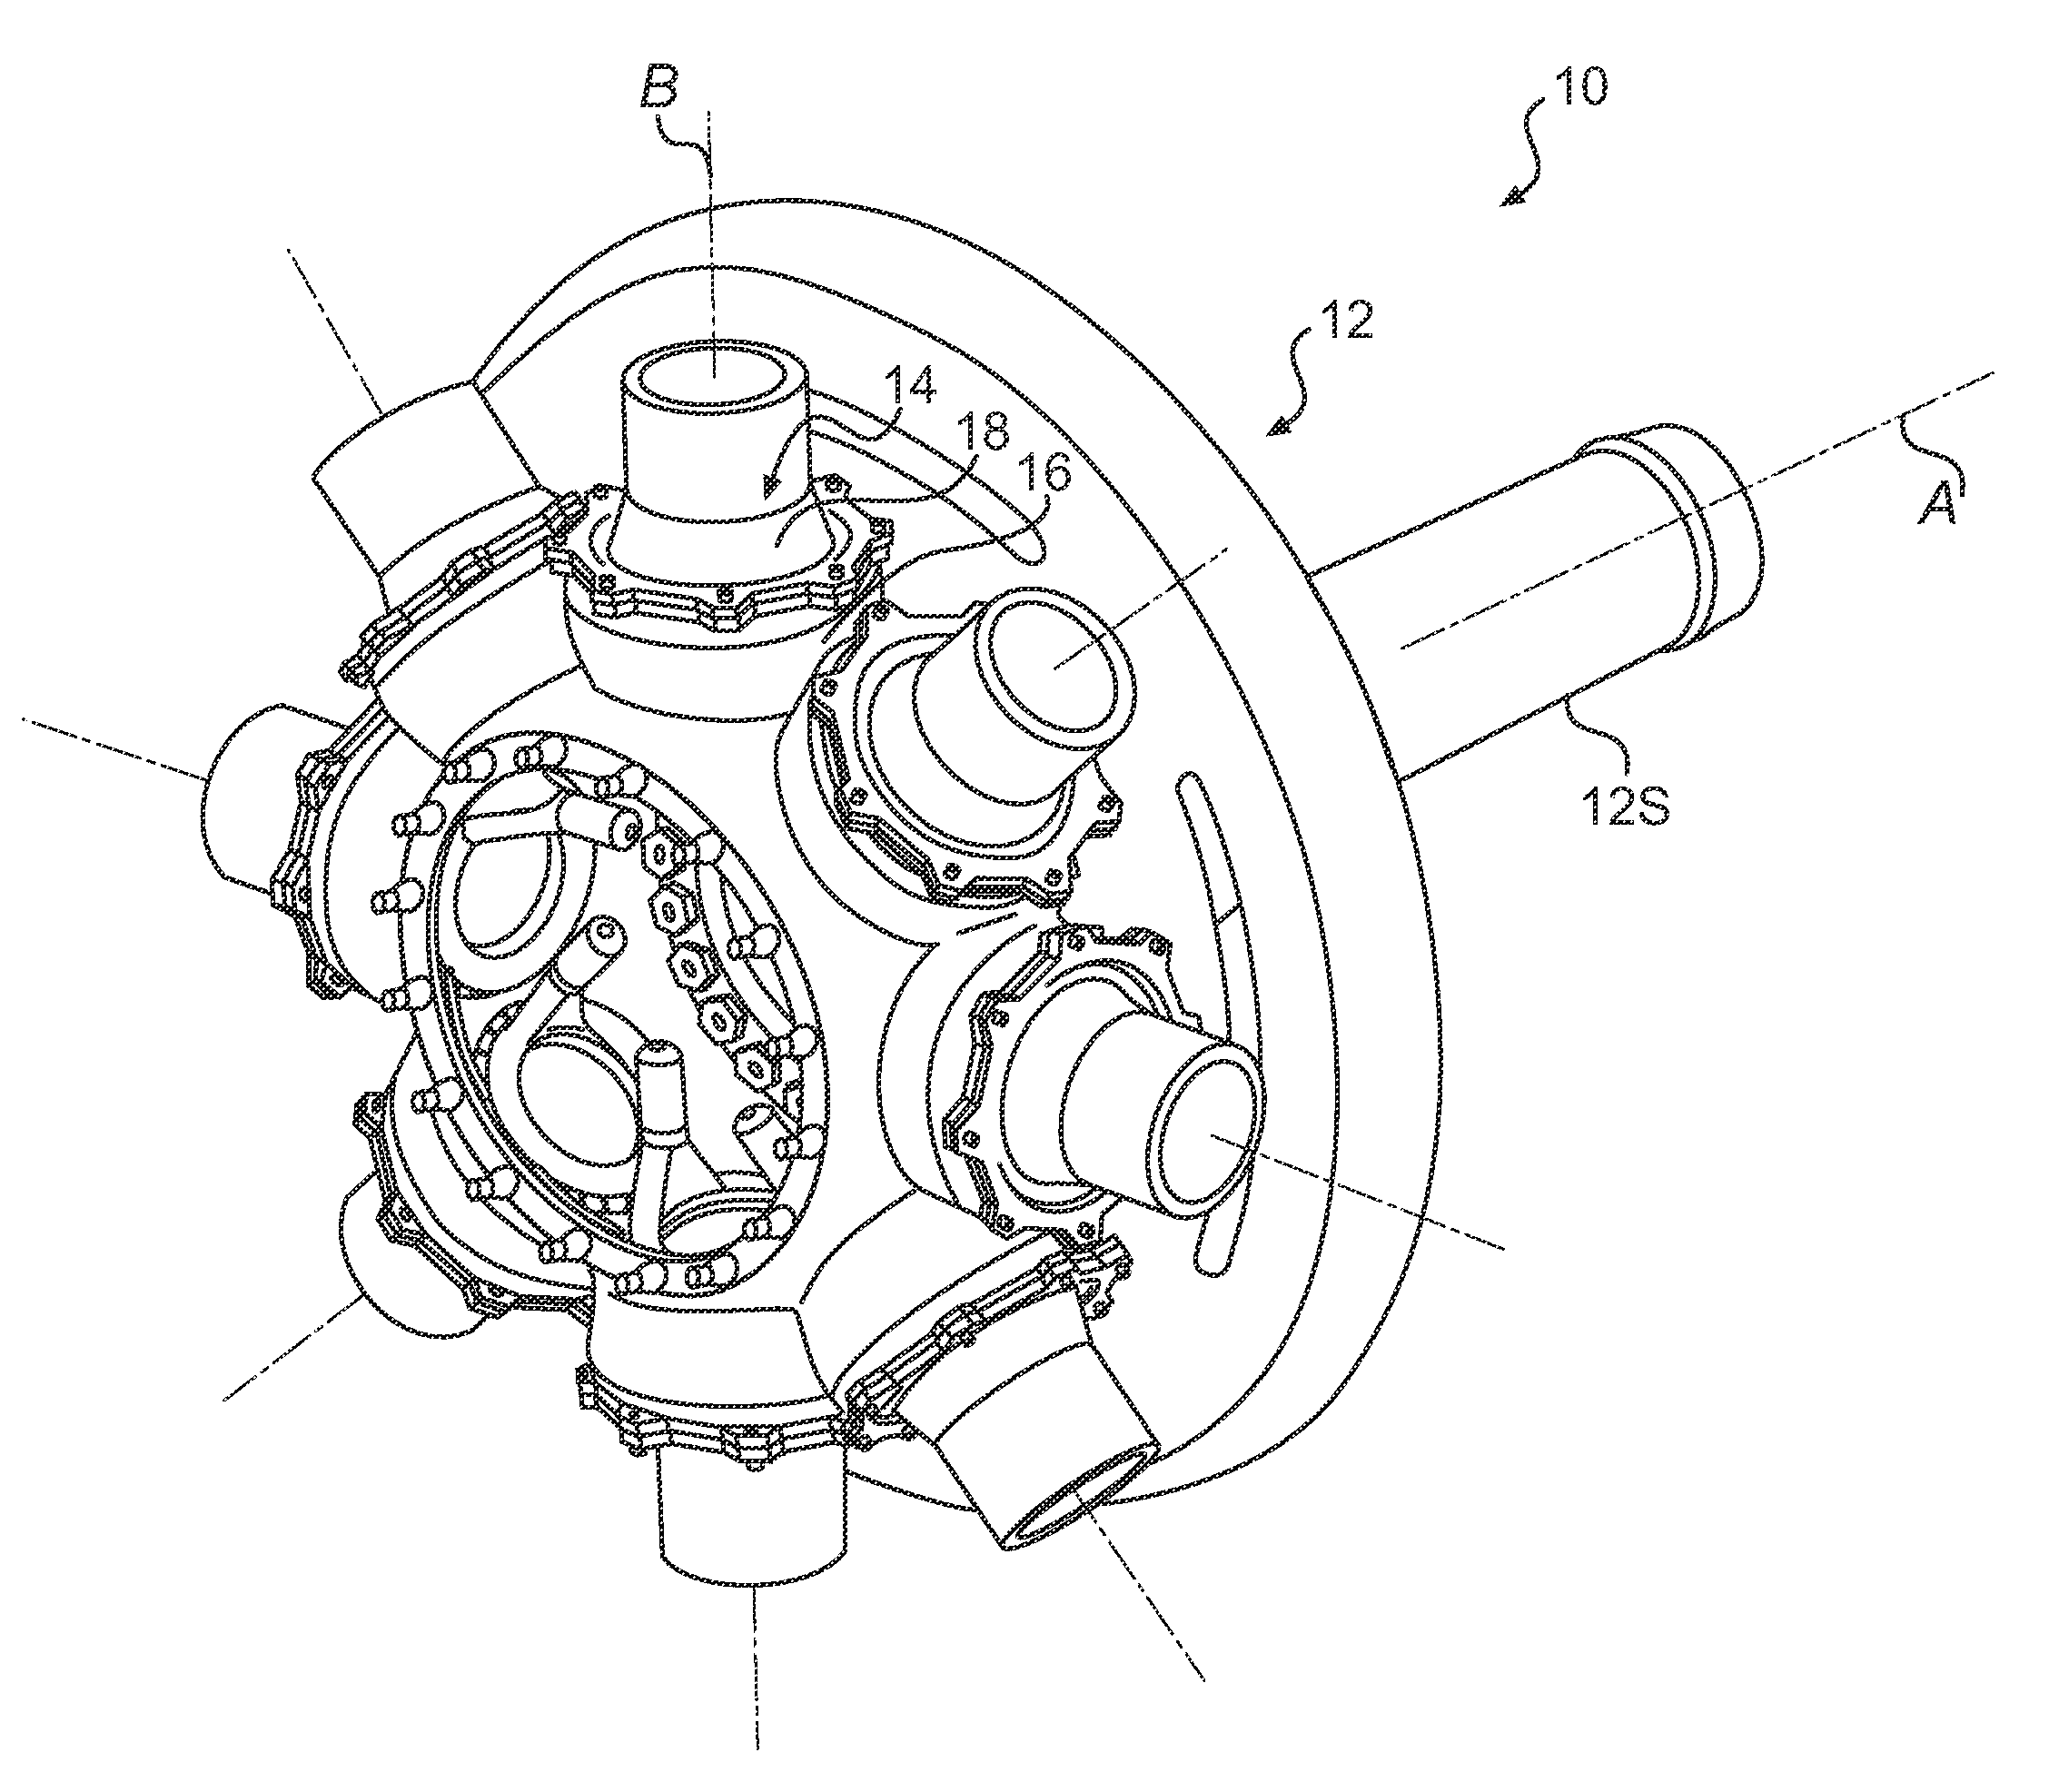 Propeller blade retention system with tapered roller bearing cartridge assemblies